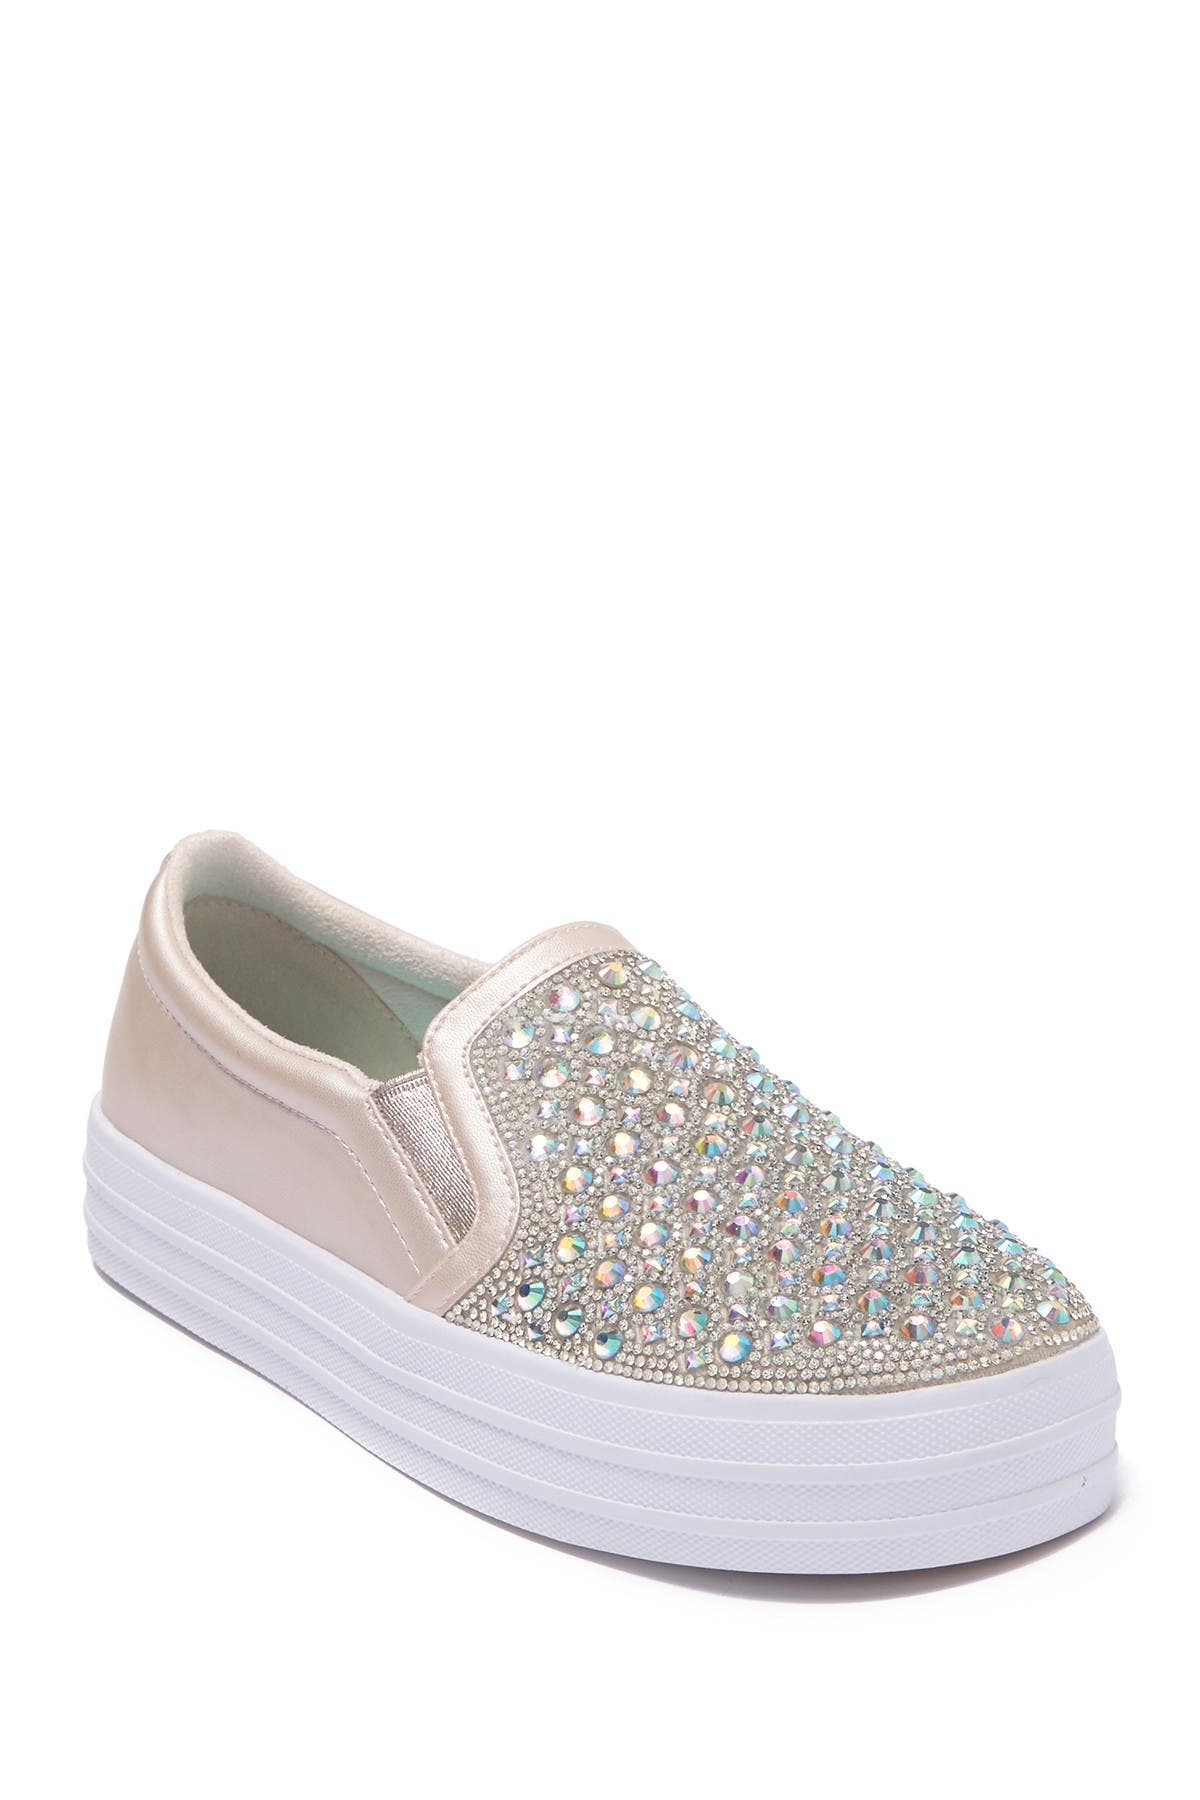 Skechers | Double Up Sparkle Muse Slip 